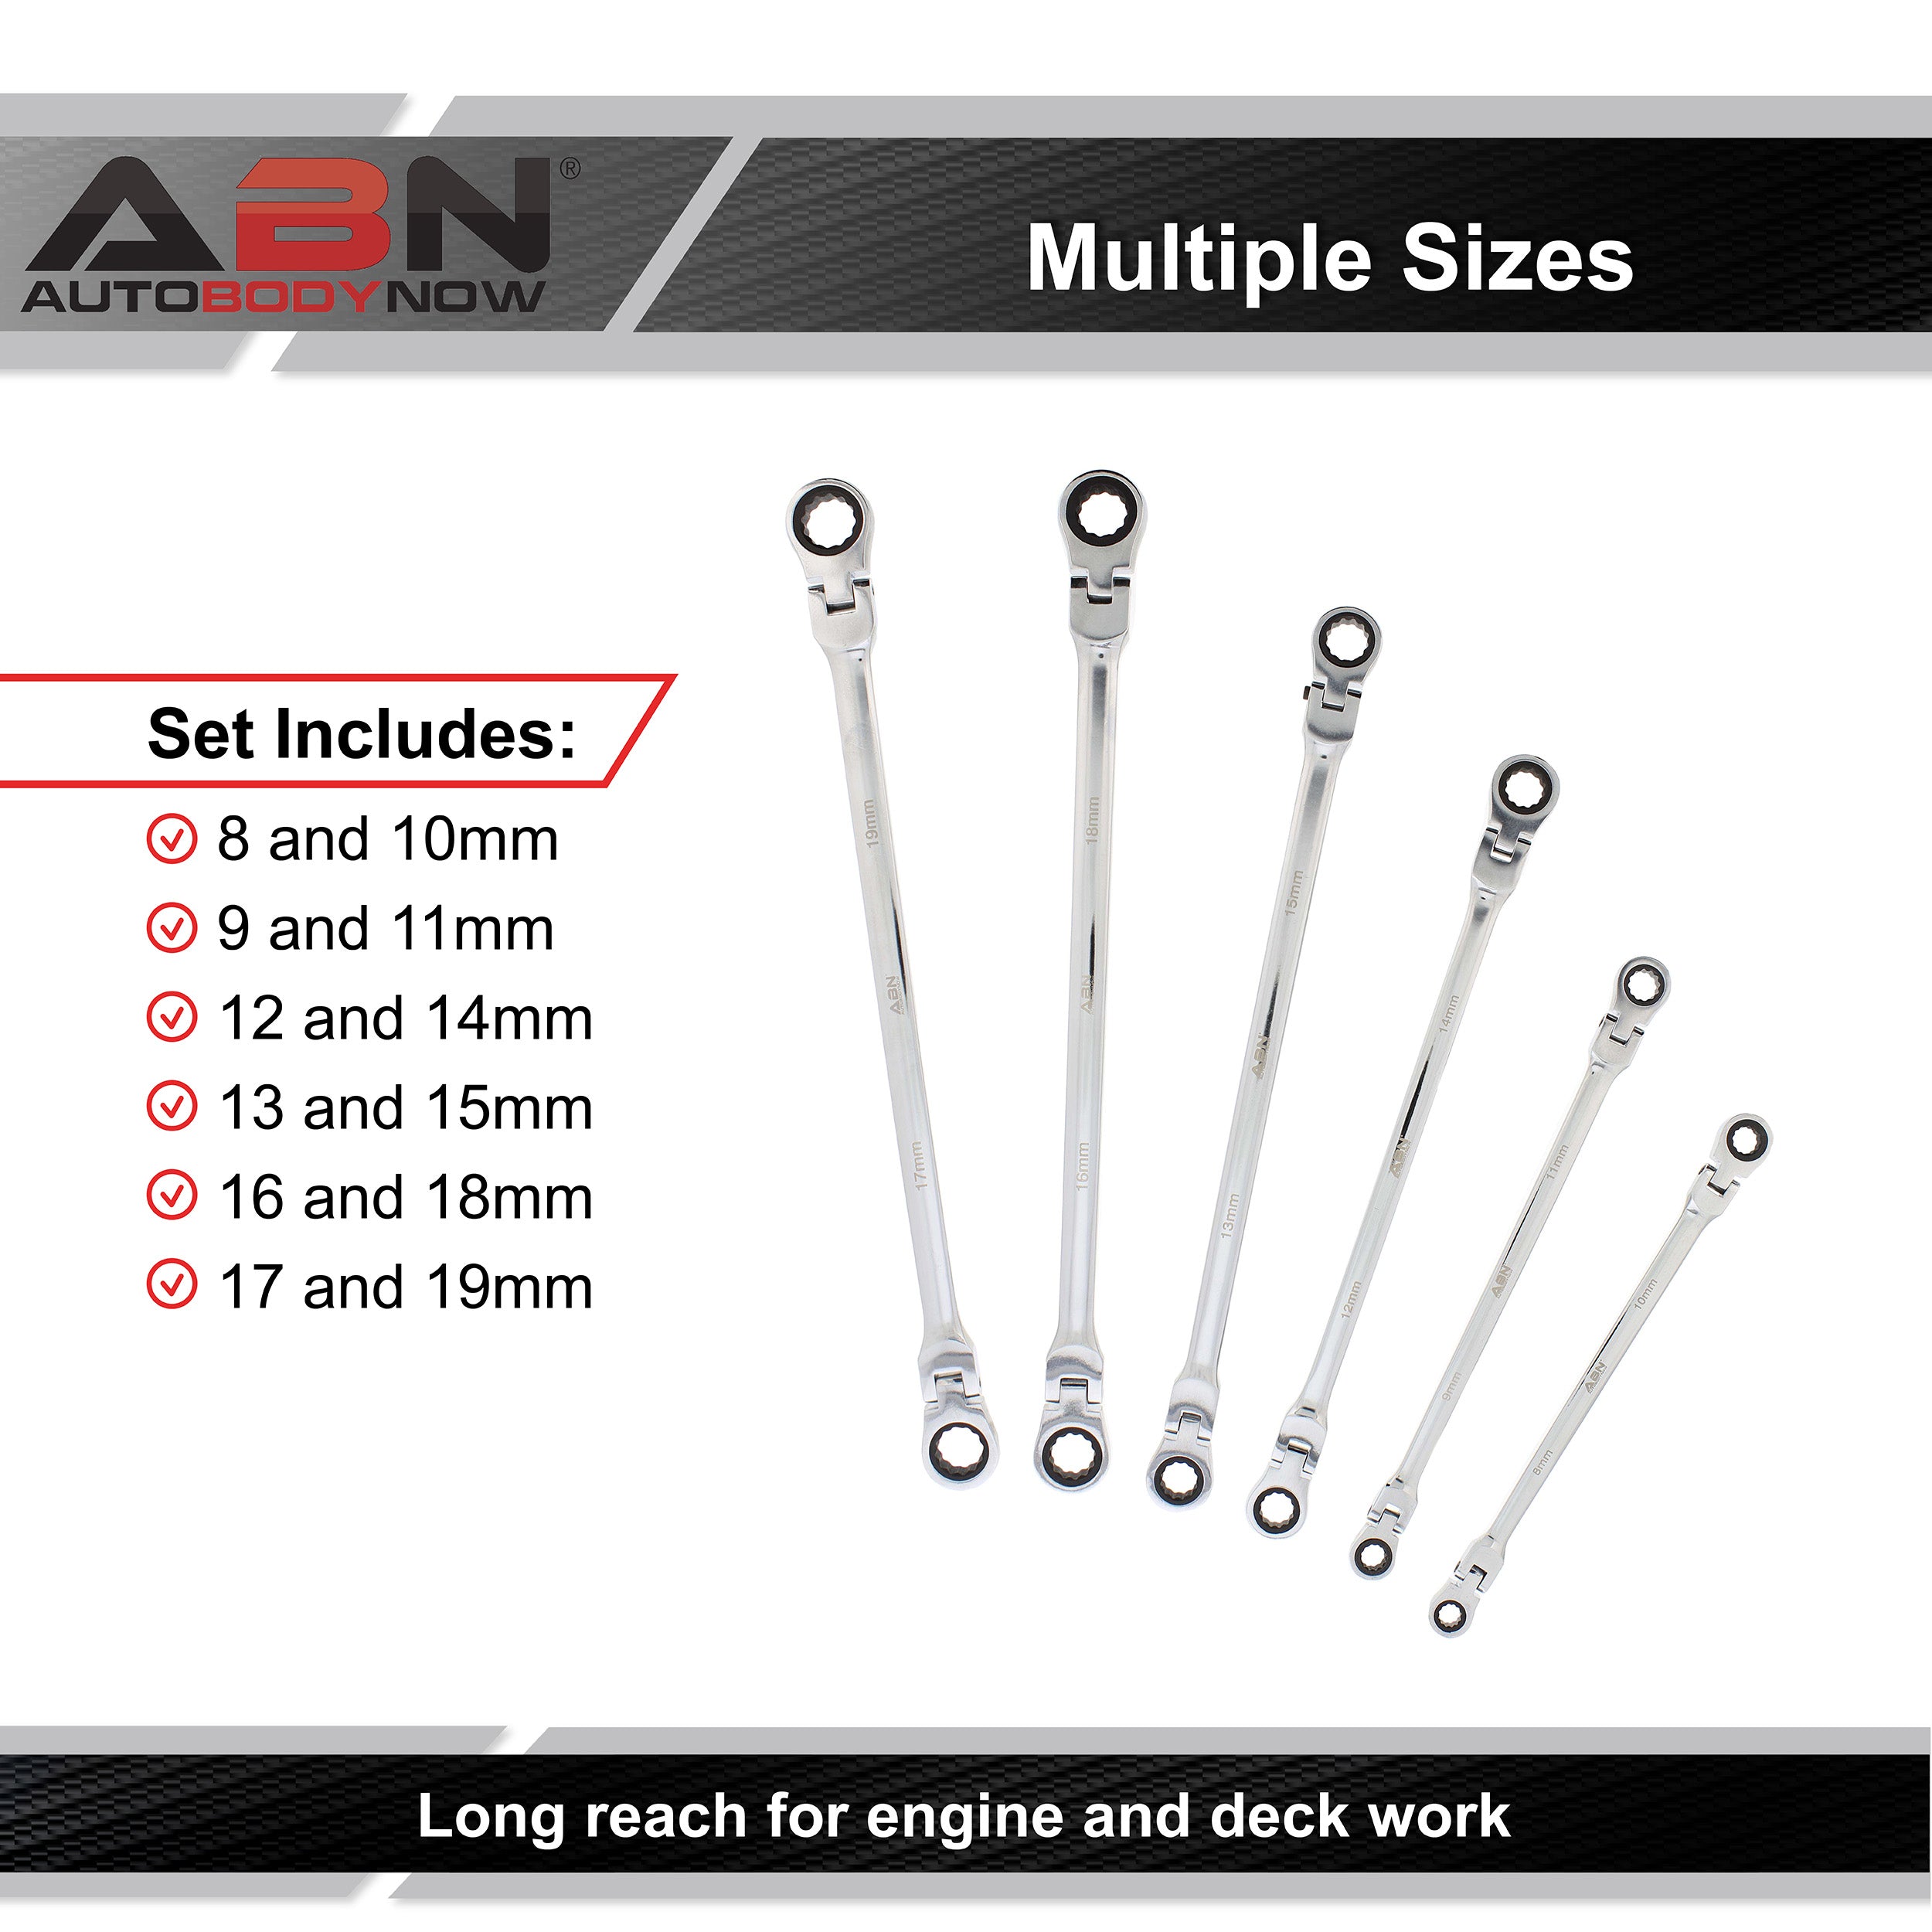 Flex Head Ratcheting Wrench Set - 6-Piece Double Box End Wrench Set